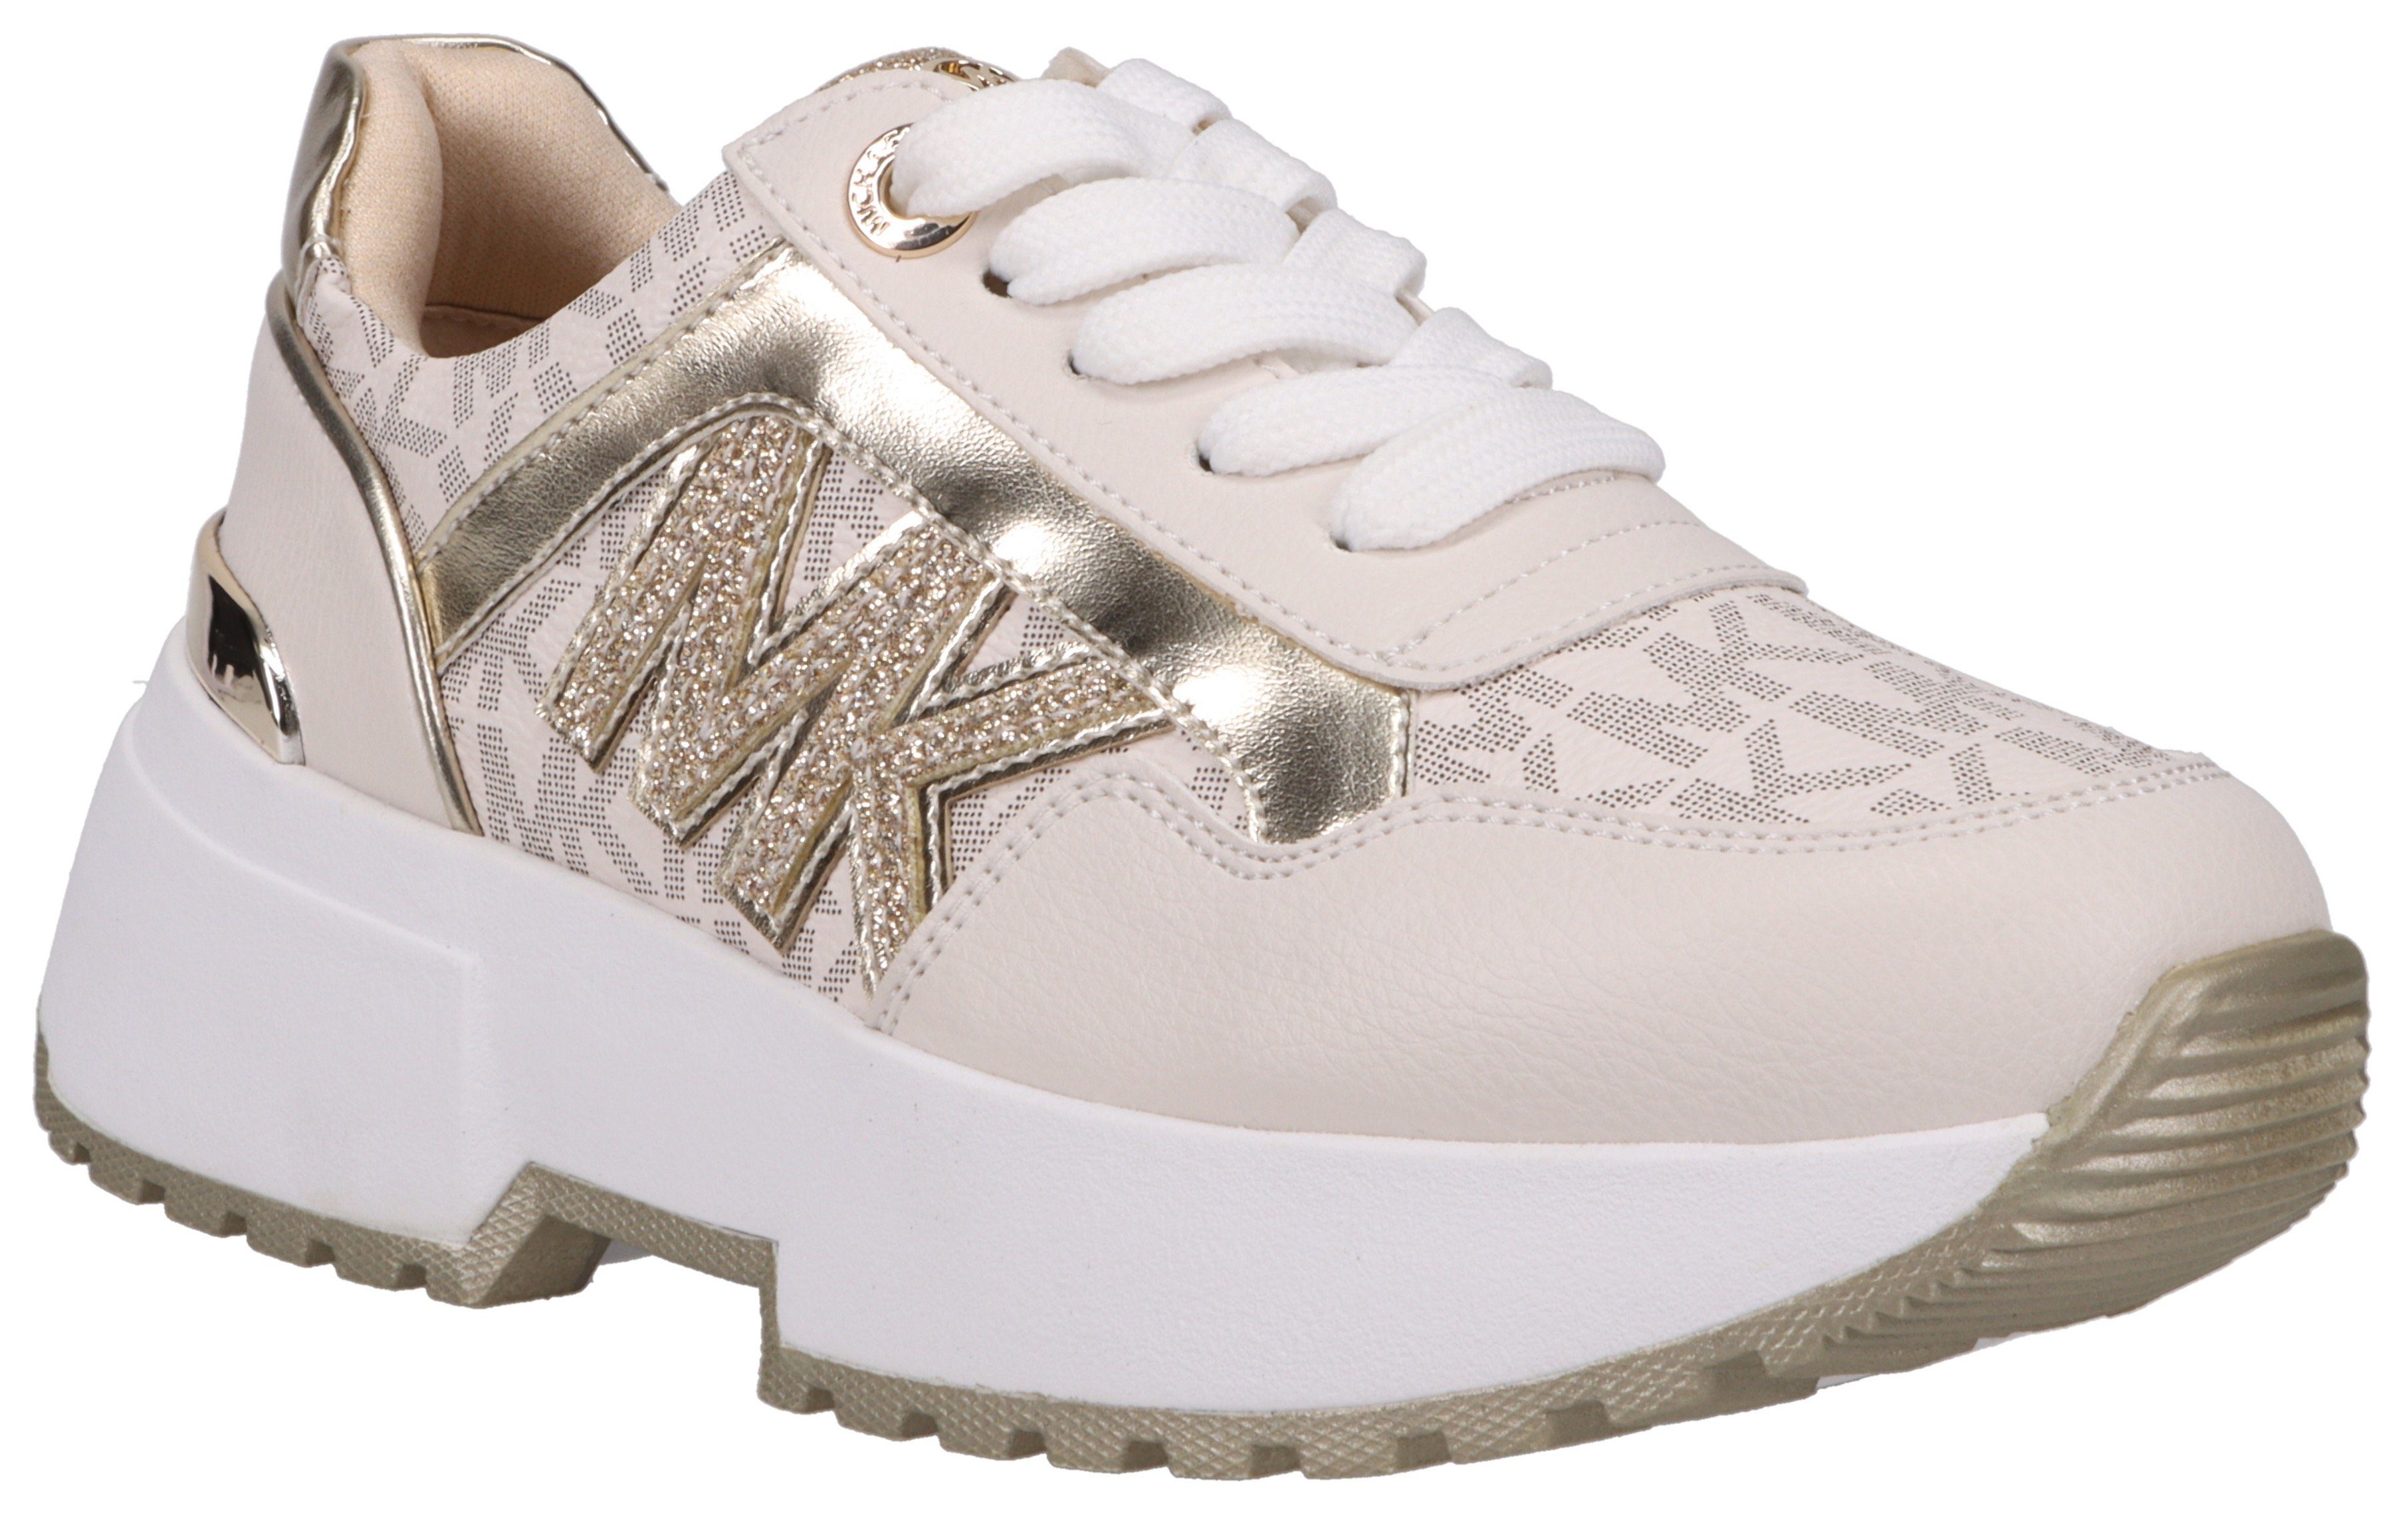 MICHAEL KORS KIDS Cosmo Maddy Plateausneaker mit Chunky-Sohle